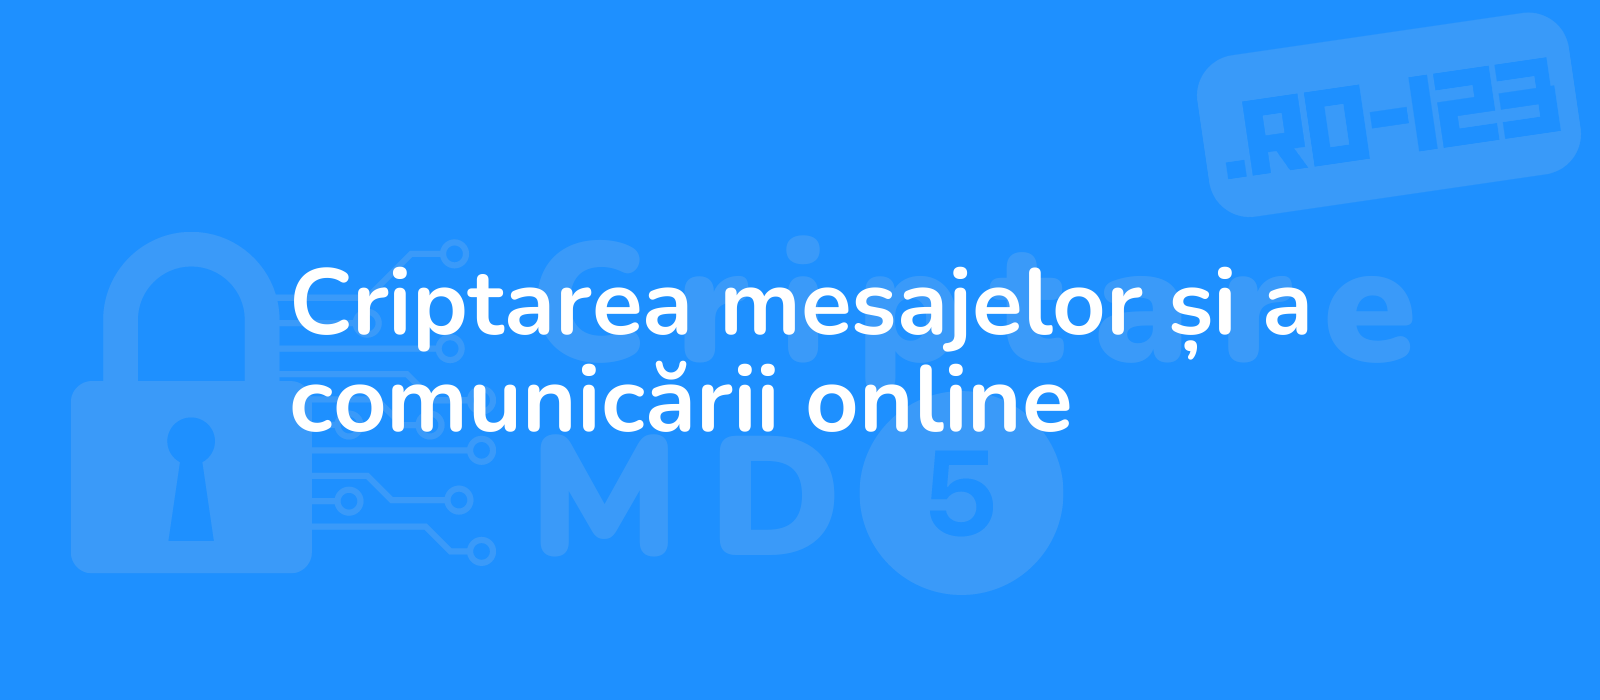 the description of the representative image for the title criptarea mesajelor si a comunicarii online is abstract digital security concept with encrypted messages and lock symbol representing secure online communication